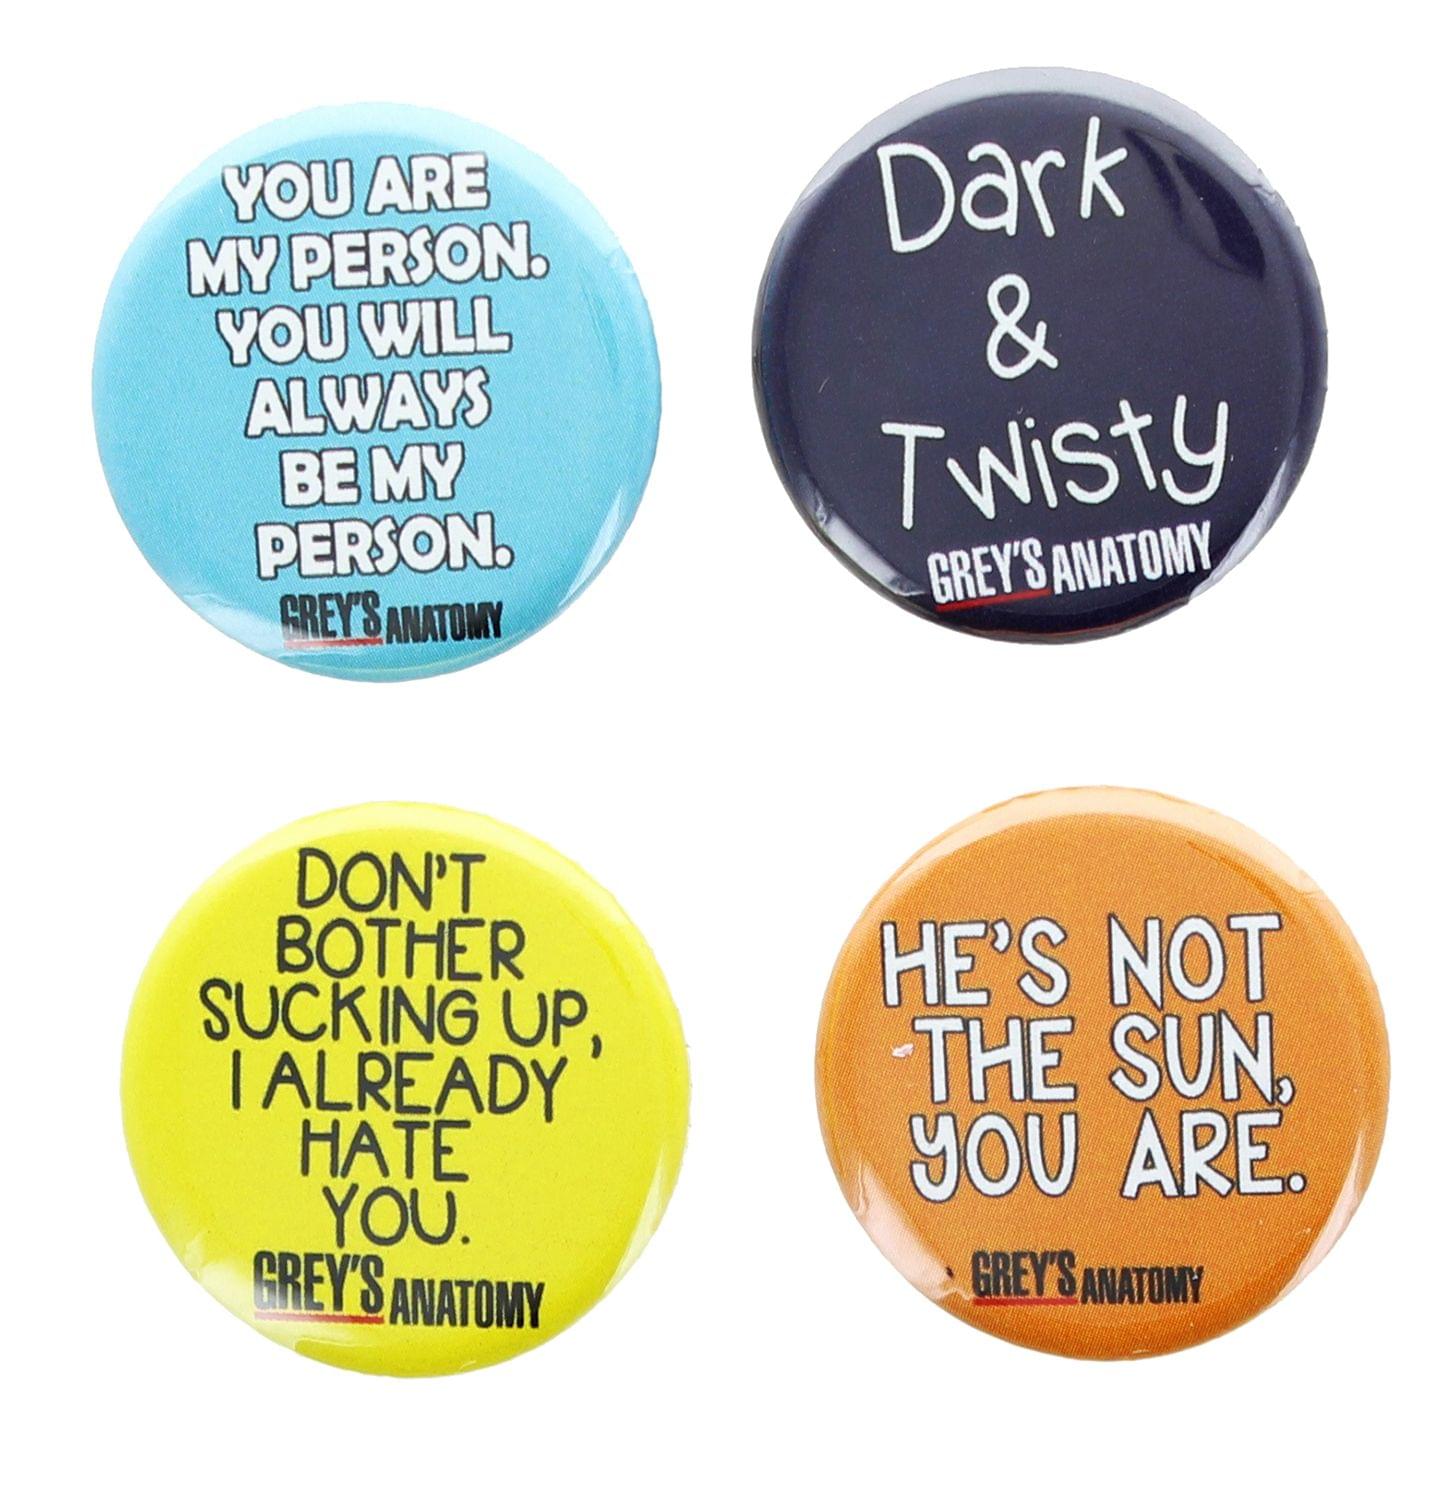 Greys Anatomy 1.25 Inch Collectible Button Pins - Set Of 4